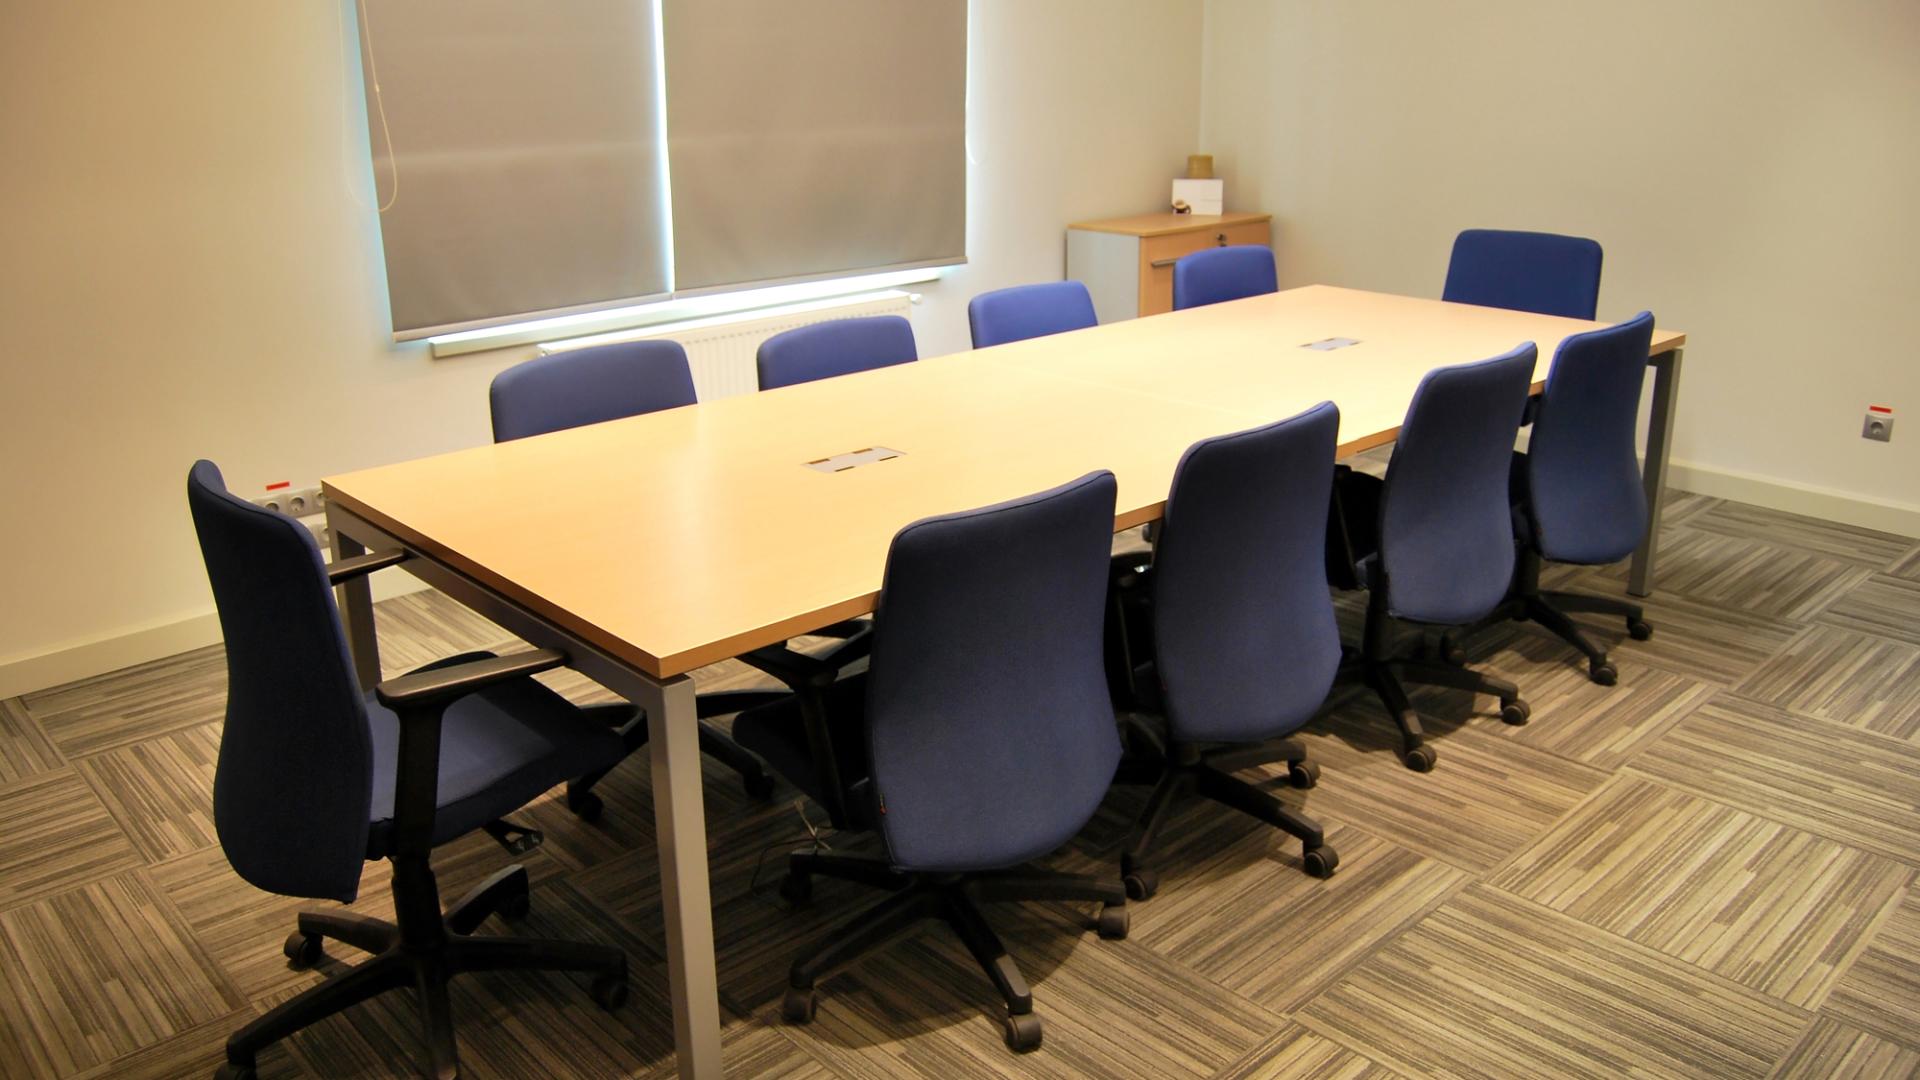 Hotel Meeting Rooms for Rent in New York City, NY